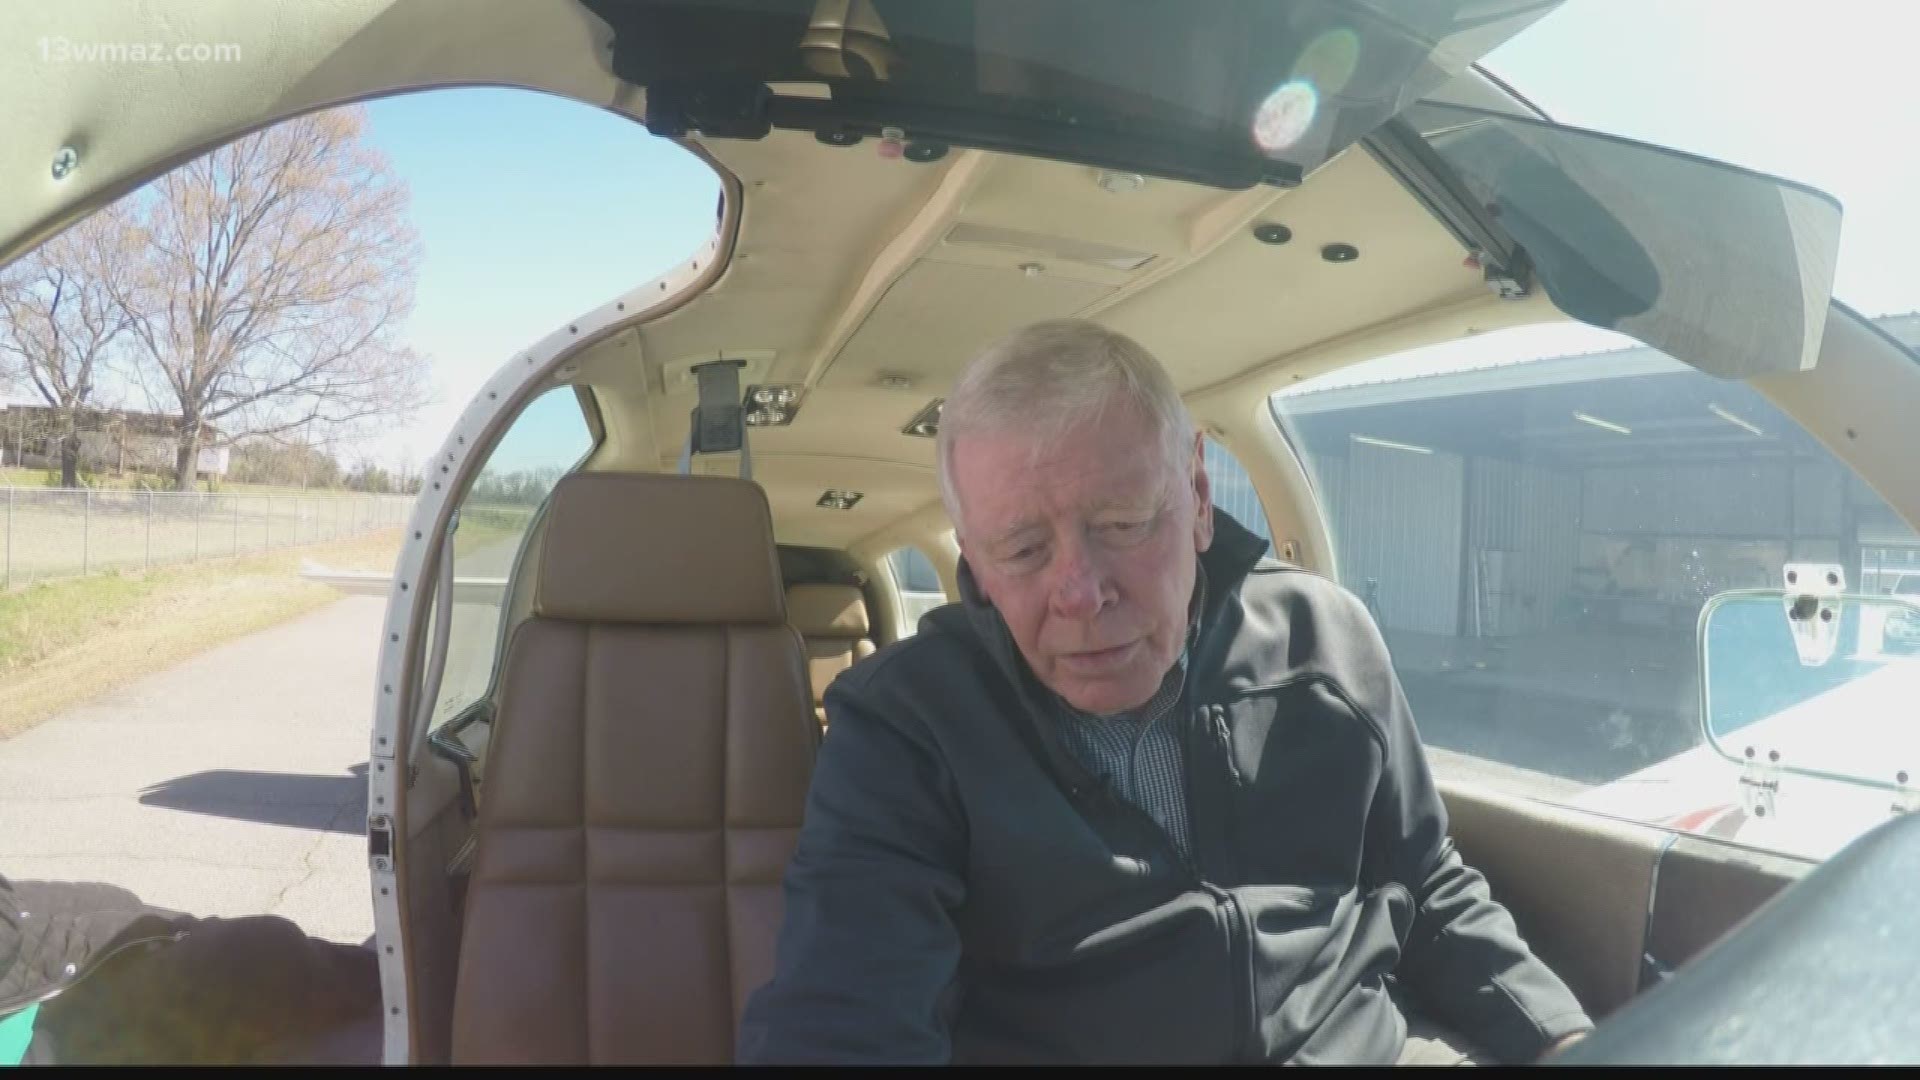 Jim Lambert, who's more than 70 years old, is still finding a way to volunteer while doing something he loves: flying. He gives 'angel flights' through Angel Flight Soars, which helps people who need medical treatment get to hospitals.